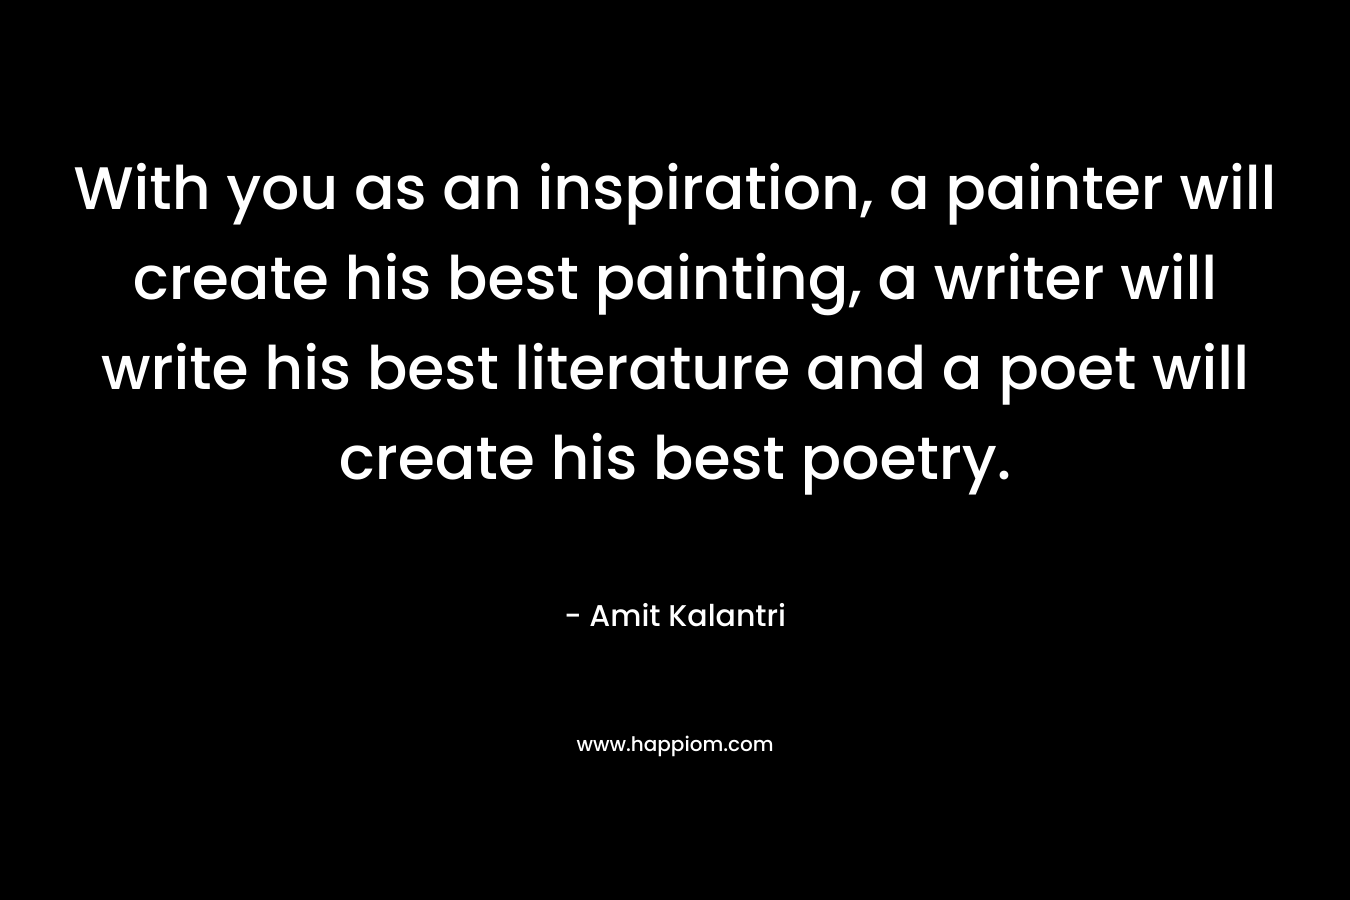 With you as an inspiration, a painter will create his best painting, a writer will write his best literature and a poet will create his best poetry.